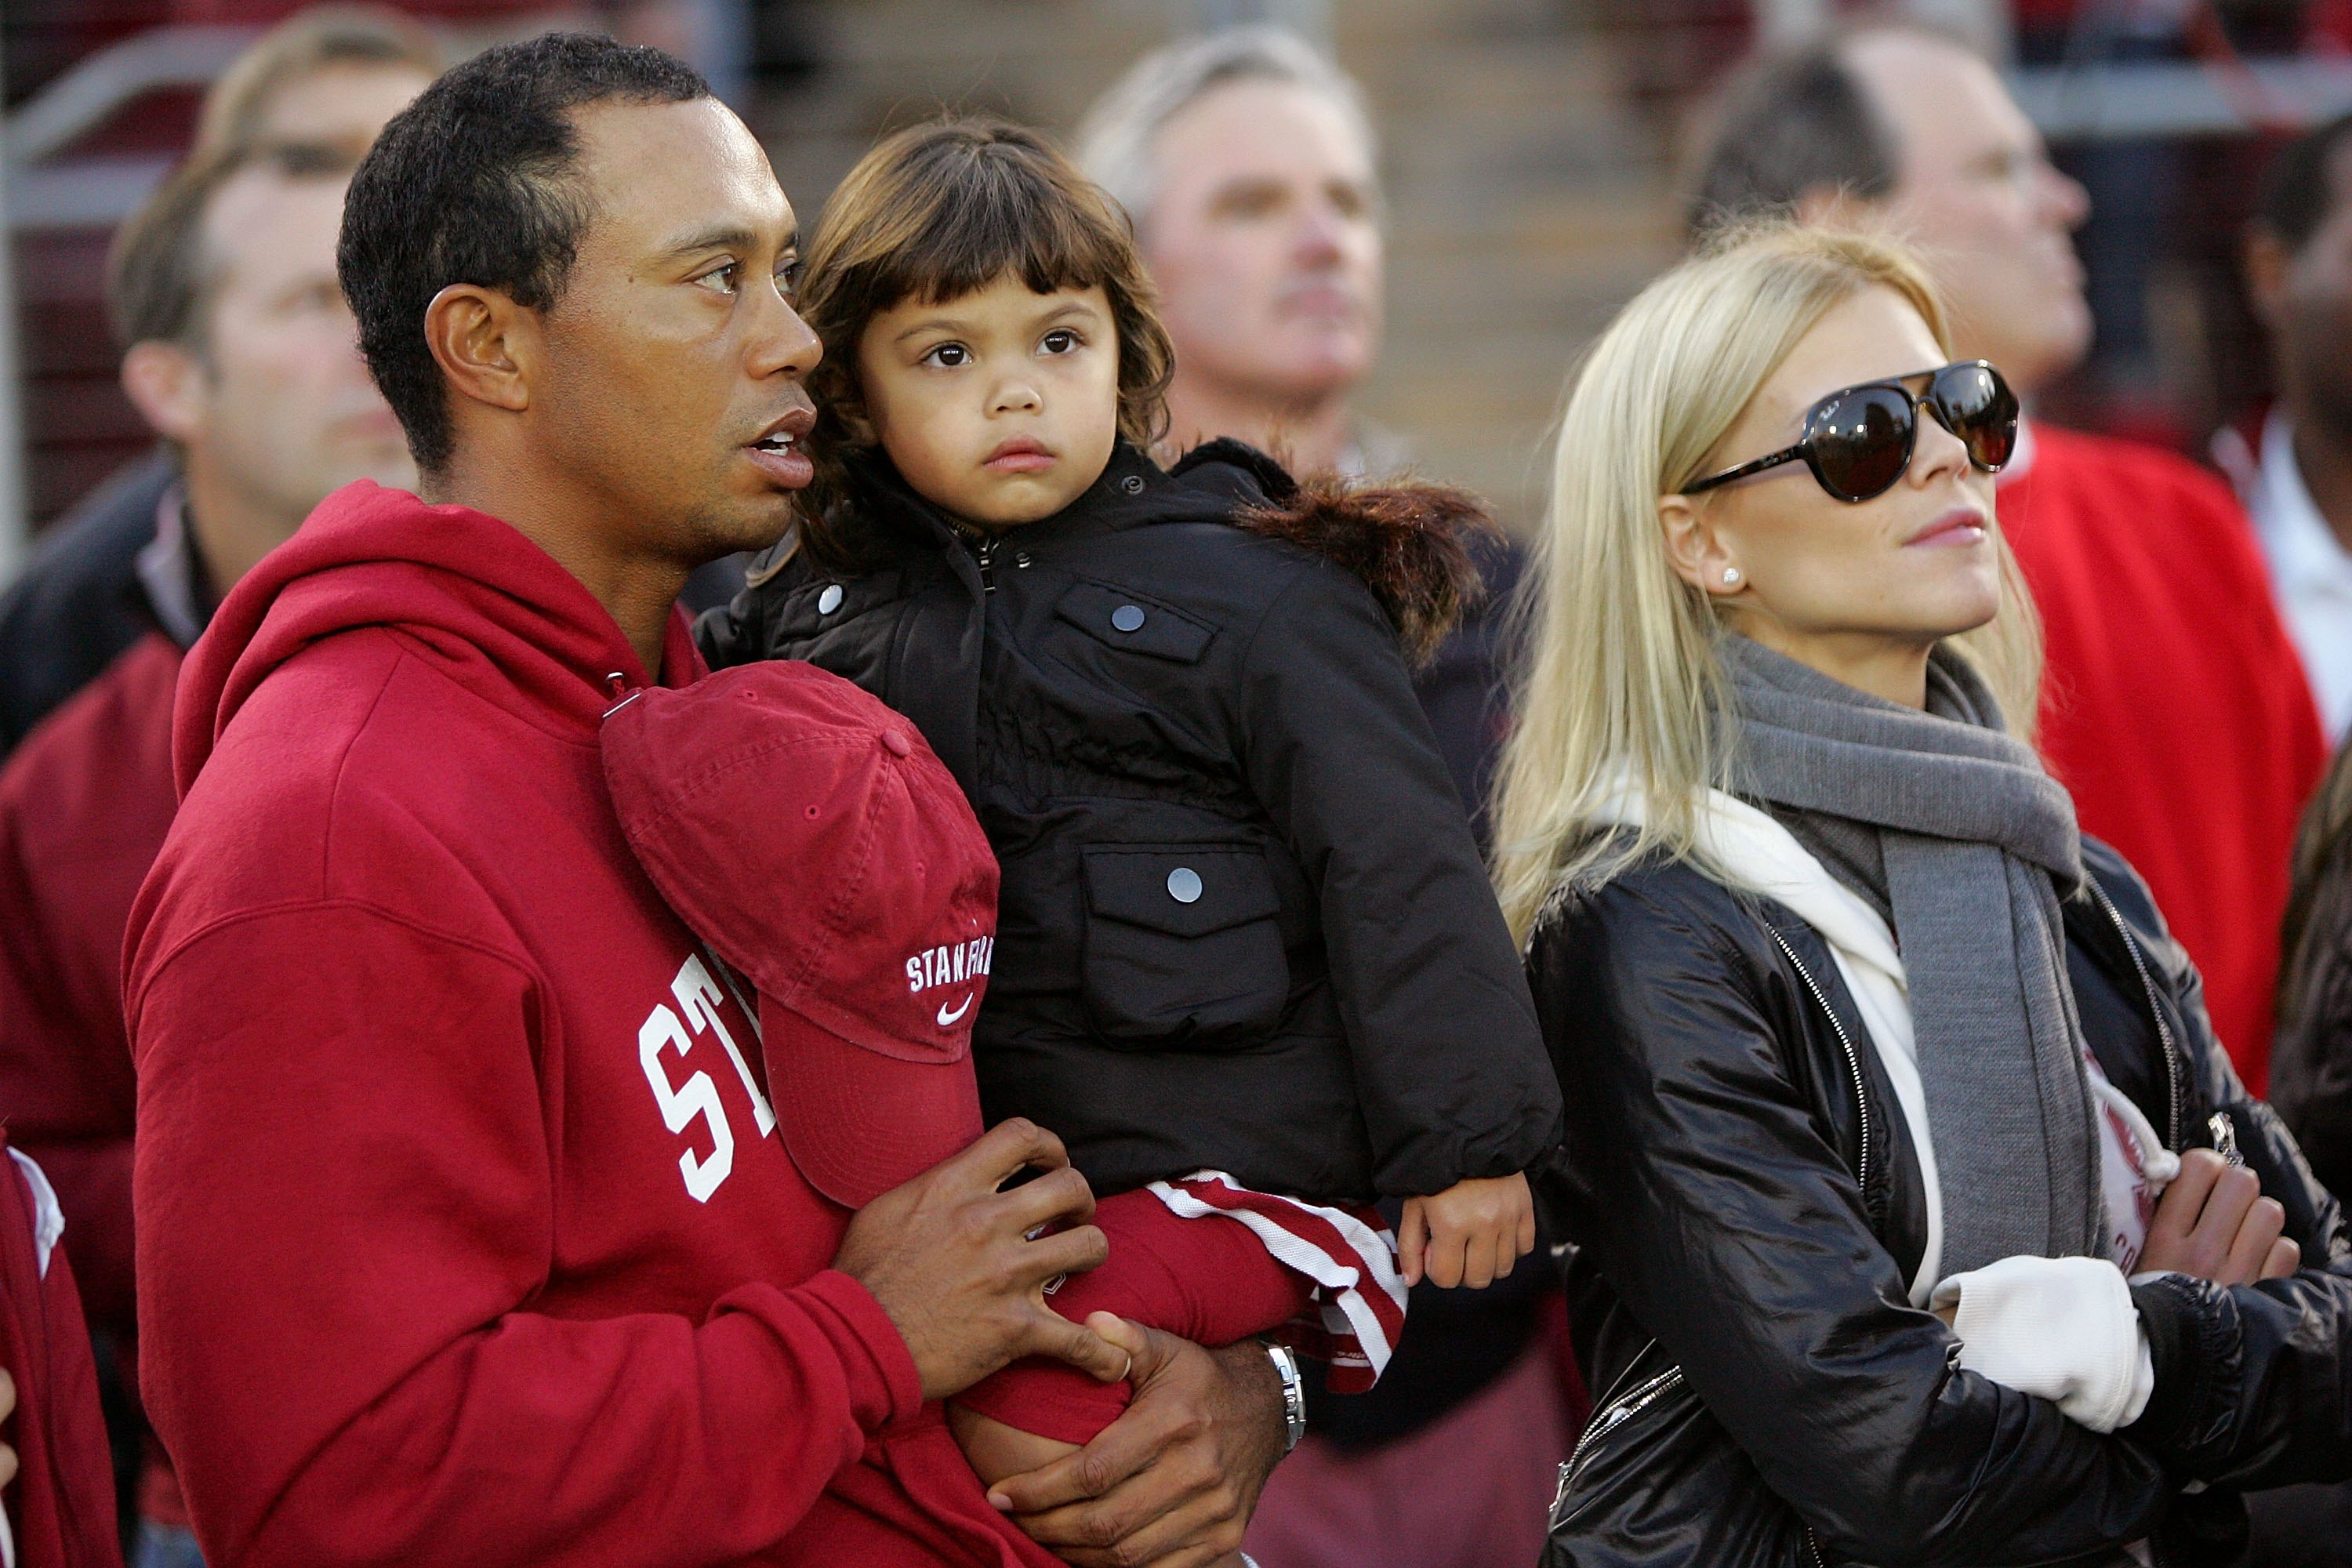 Tiger Woods and Elin Nordegren with daughter Sam, 2009 (Photo: Getty Images)